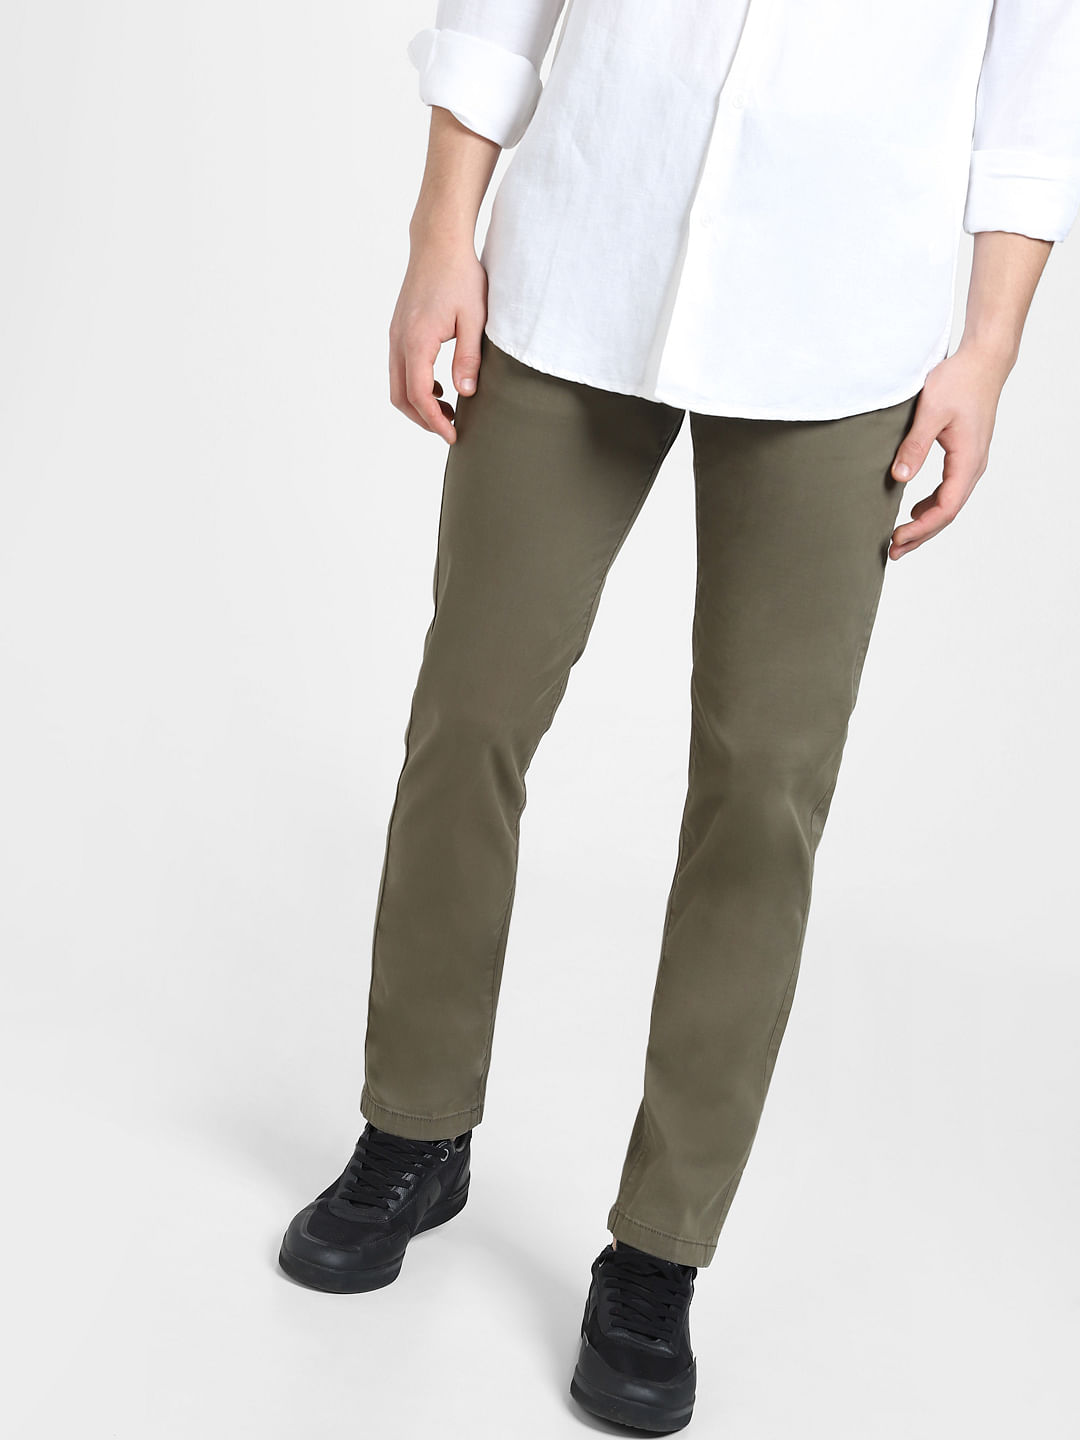 Buy Arrow Regular Fit Pleated Front Trousers - NNNOW.com